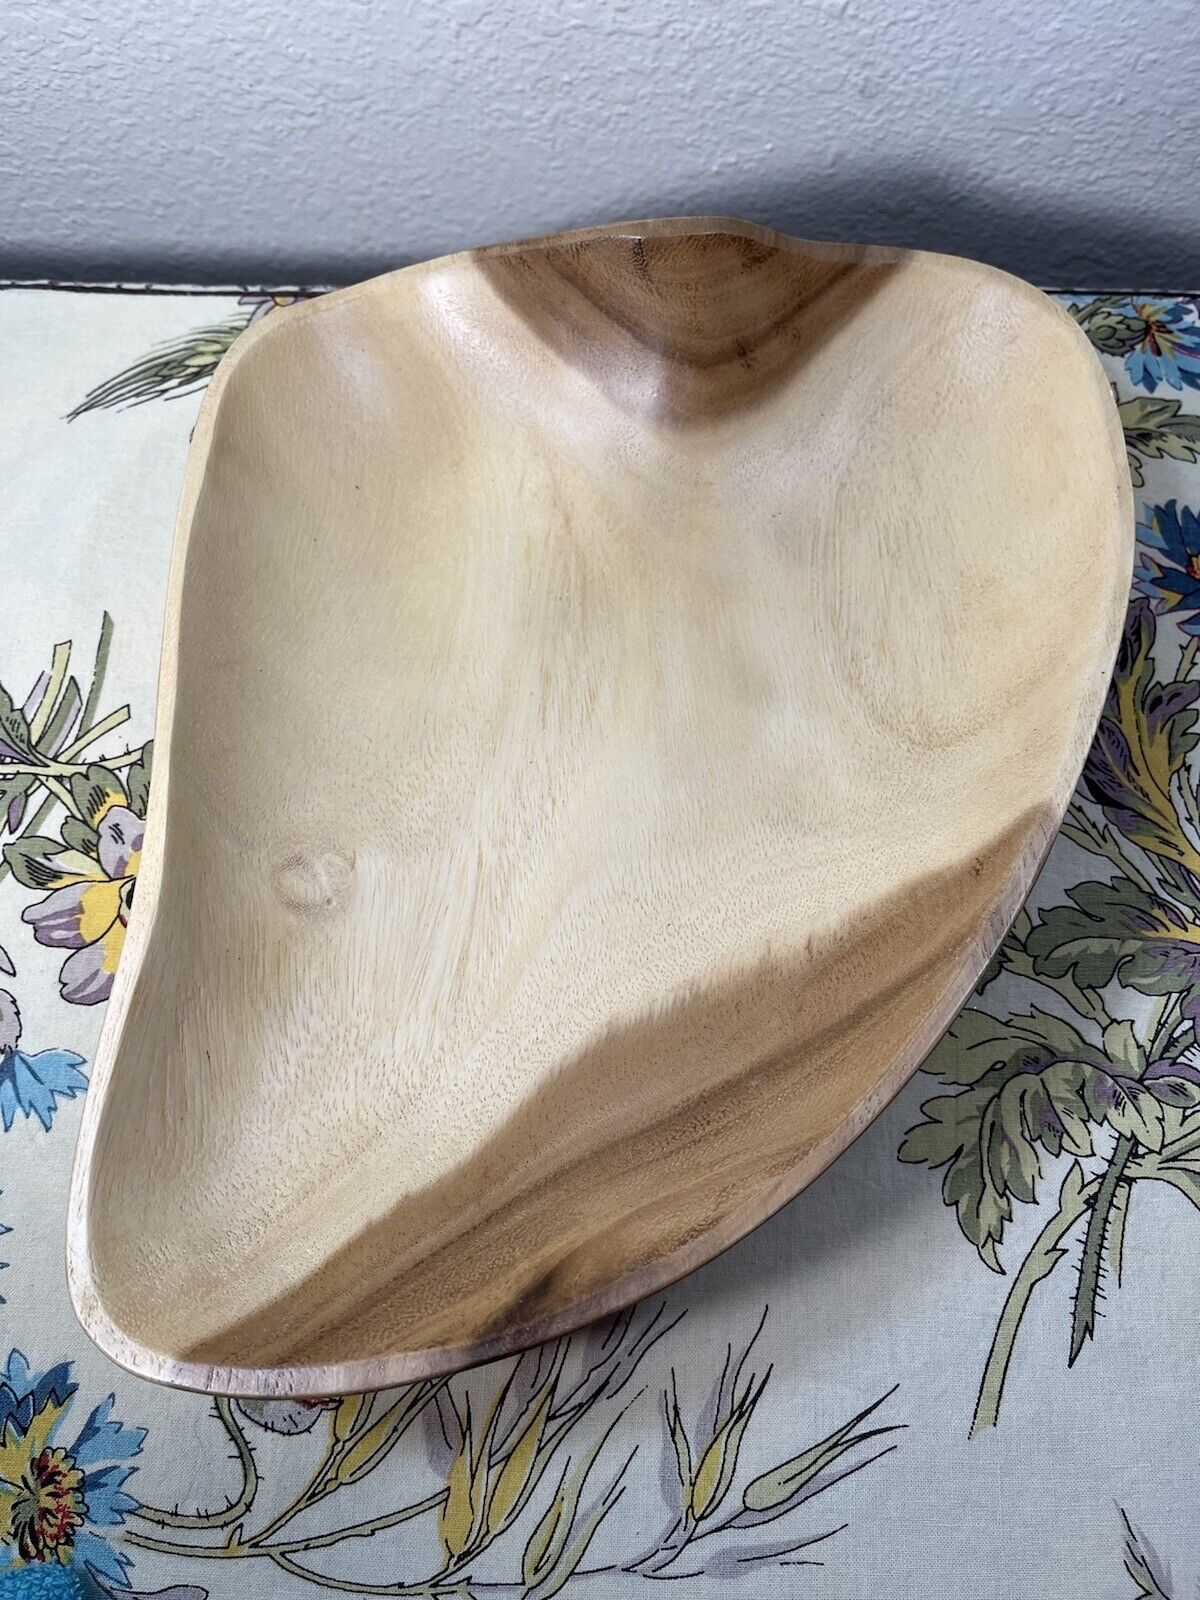 Wooden Heart Shaped Dish Bowl Acadia Wood Bowl Enrich 1453 Valentine Gift